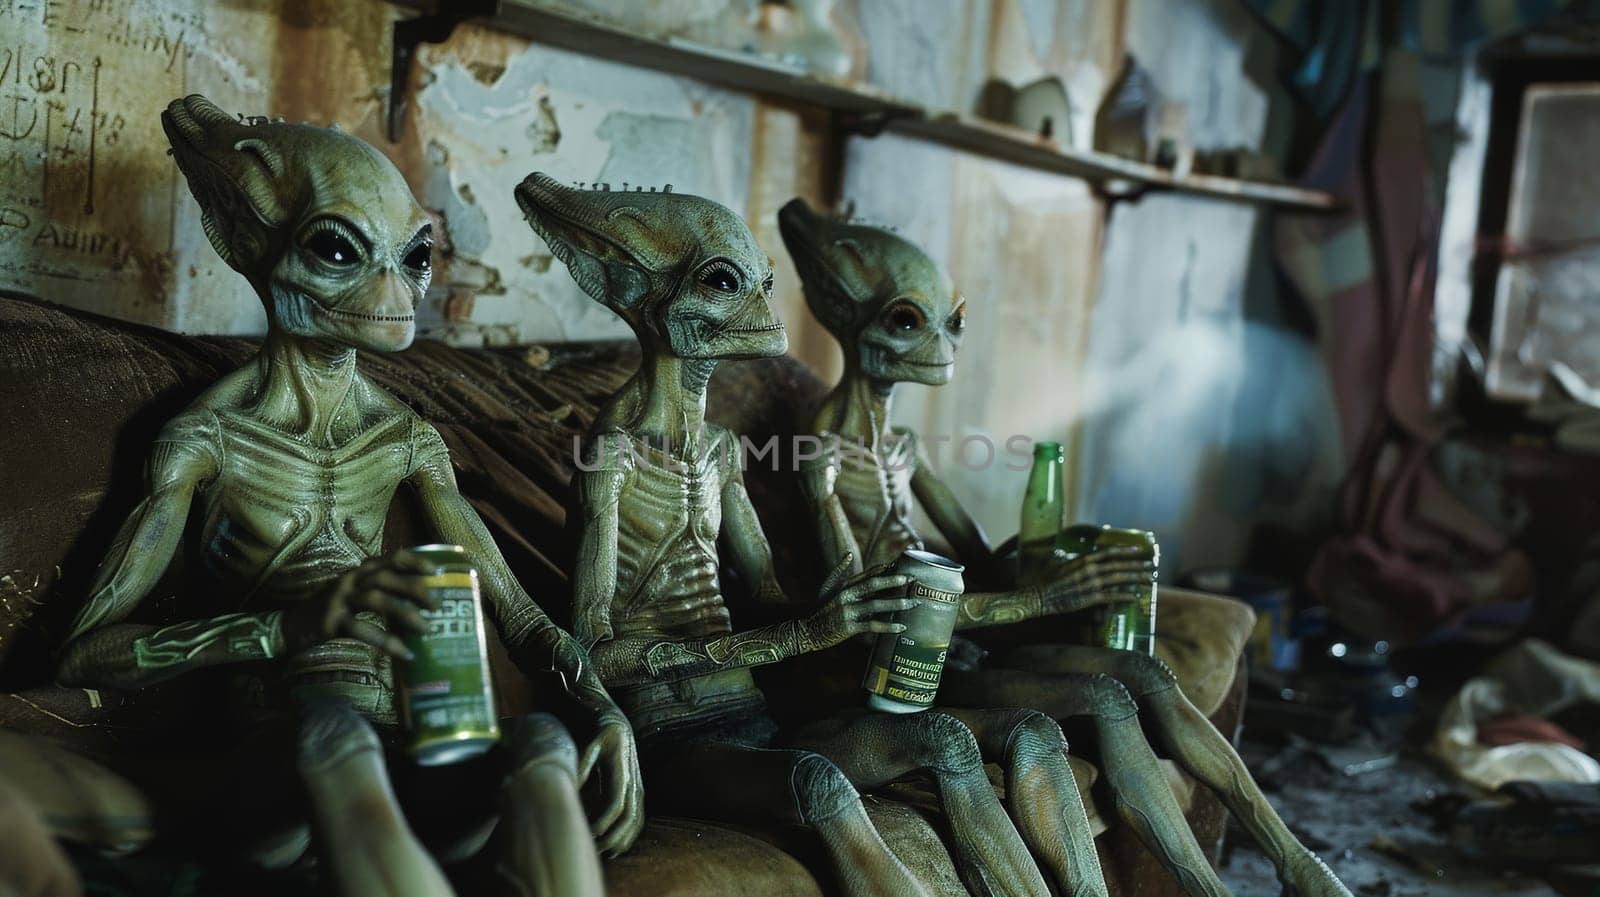 alien creatures lounging on a sofa and holding drinking, Cinematic scene by nijieimu